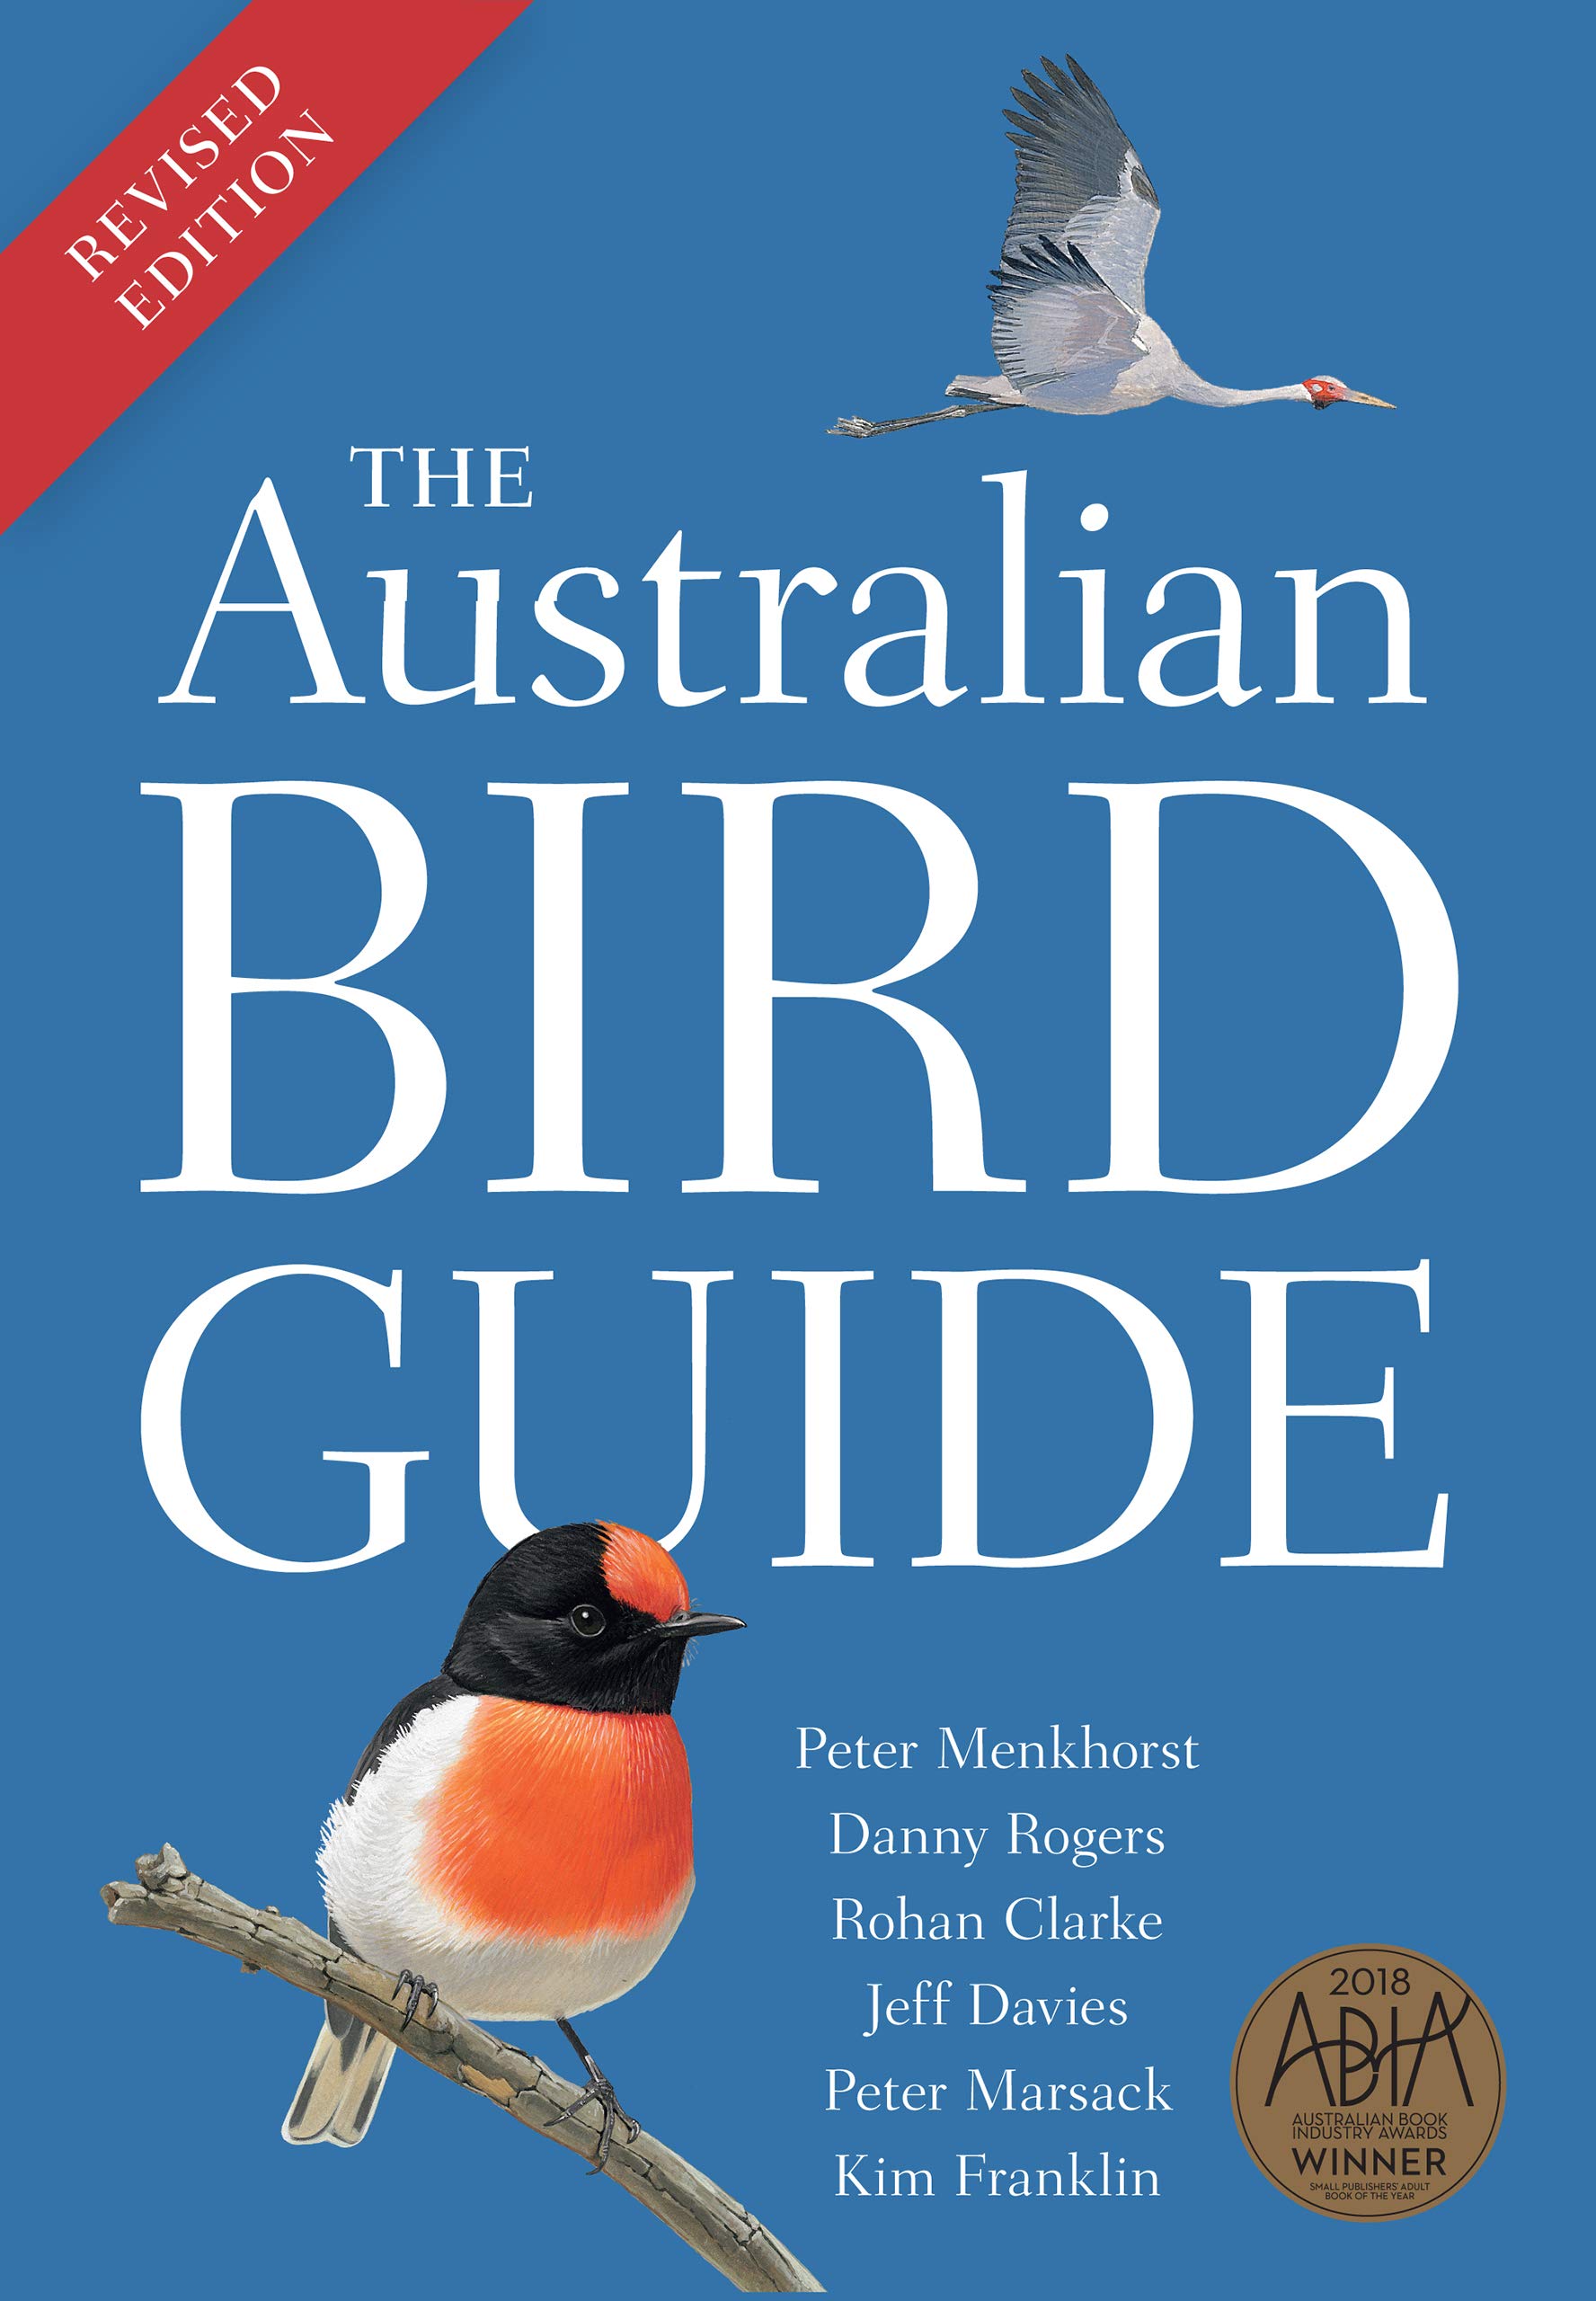 The Australian Bird Guide, by Peter Menkhorst (Author), Danny Rogers (Author), Rohan Clarke (Author), Jeff Davies (Illustrator), Peter Marsack (Illustrator), Kim Franklin (Illustrator) - Red-browed Firetail - Red-browed Finch - Neochmia temporalis